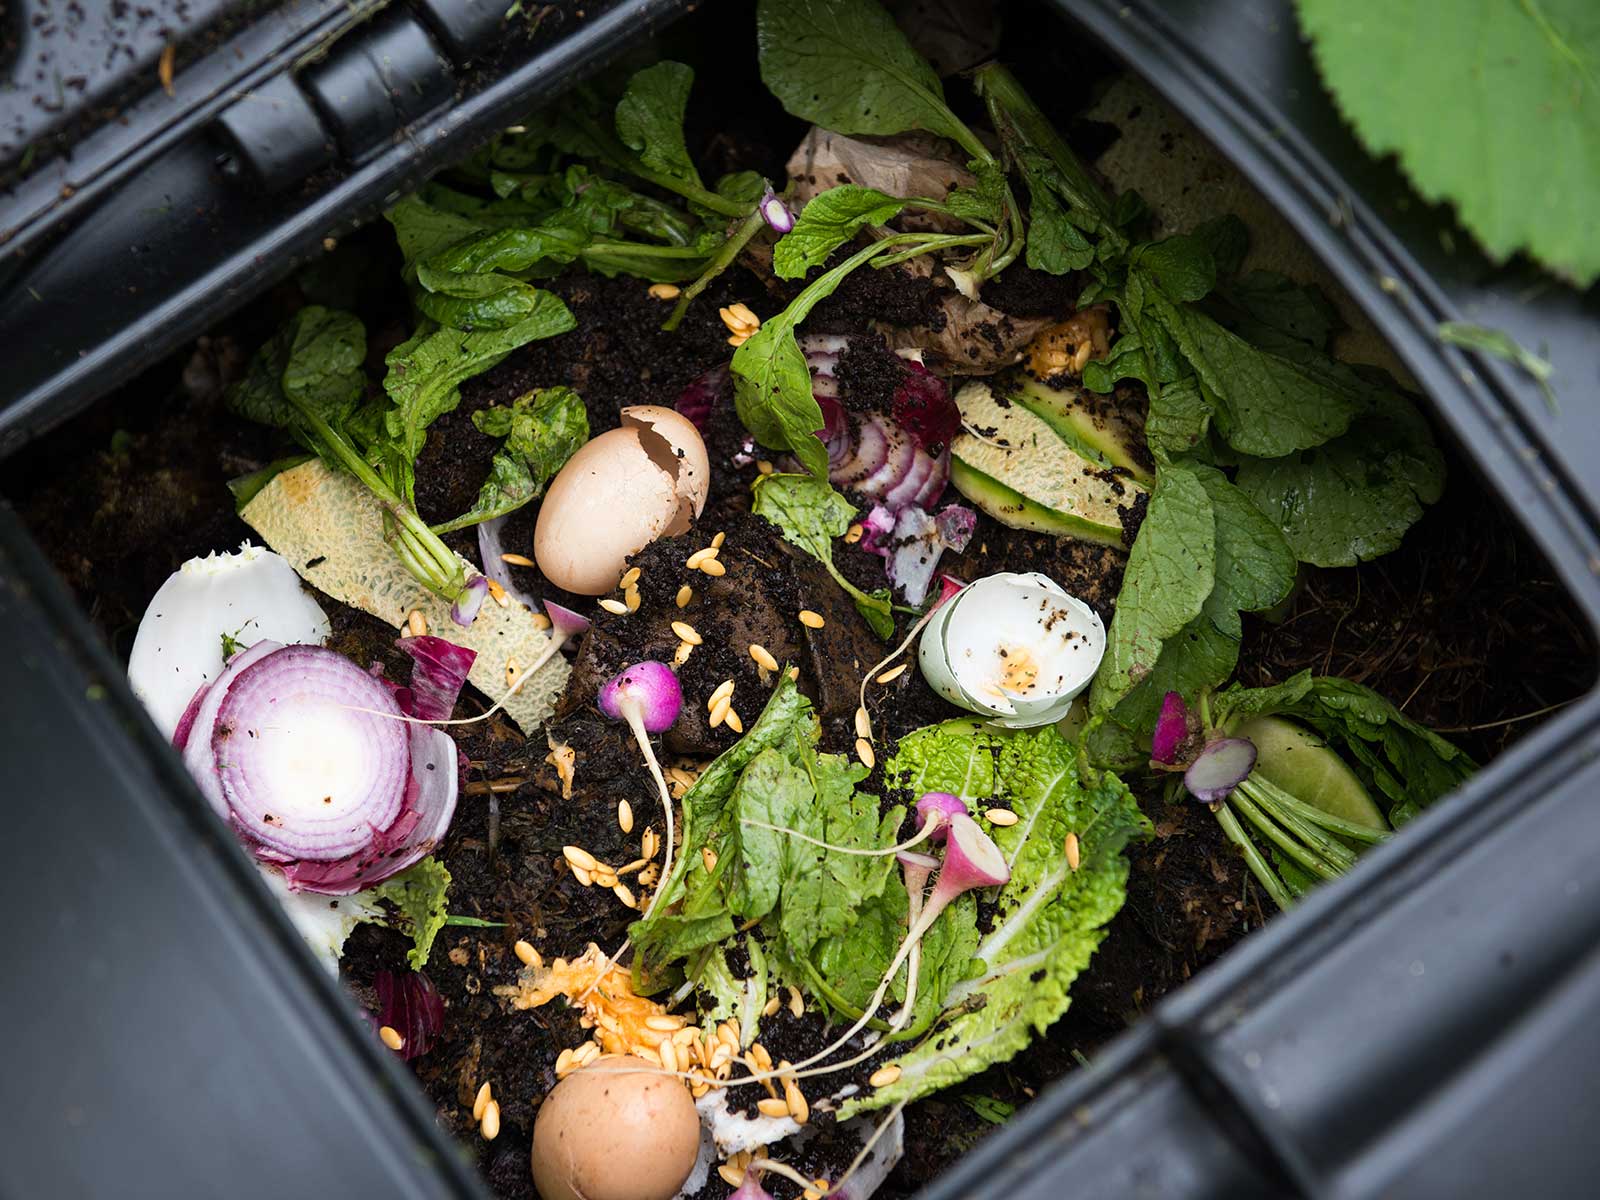 Composting for Restaurants: How and Why